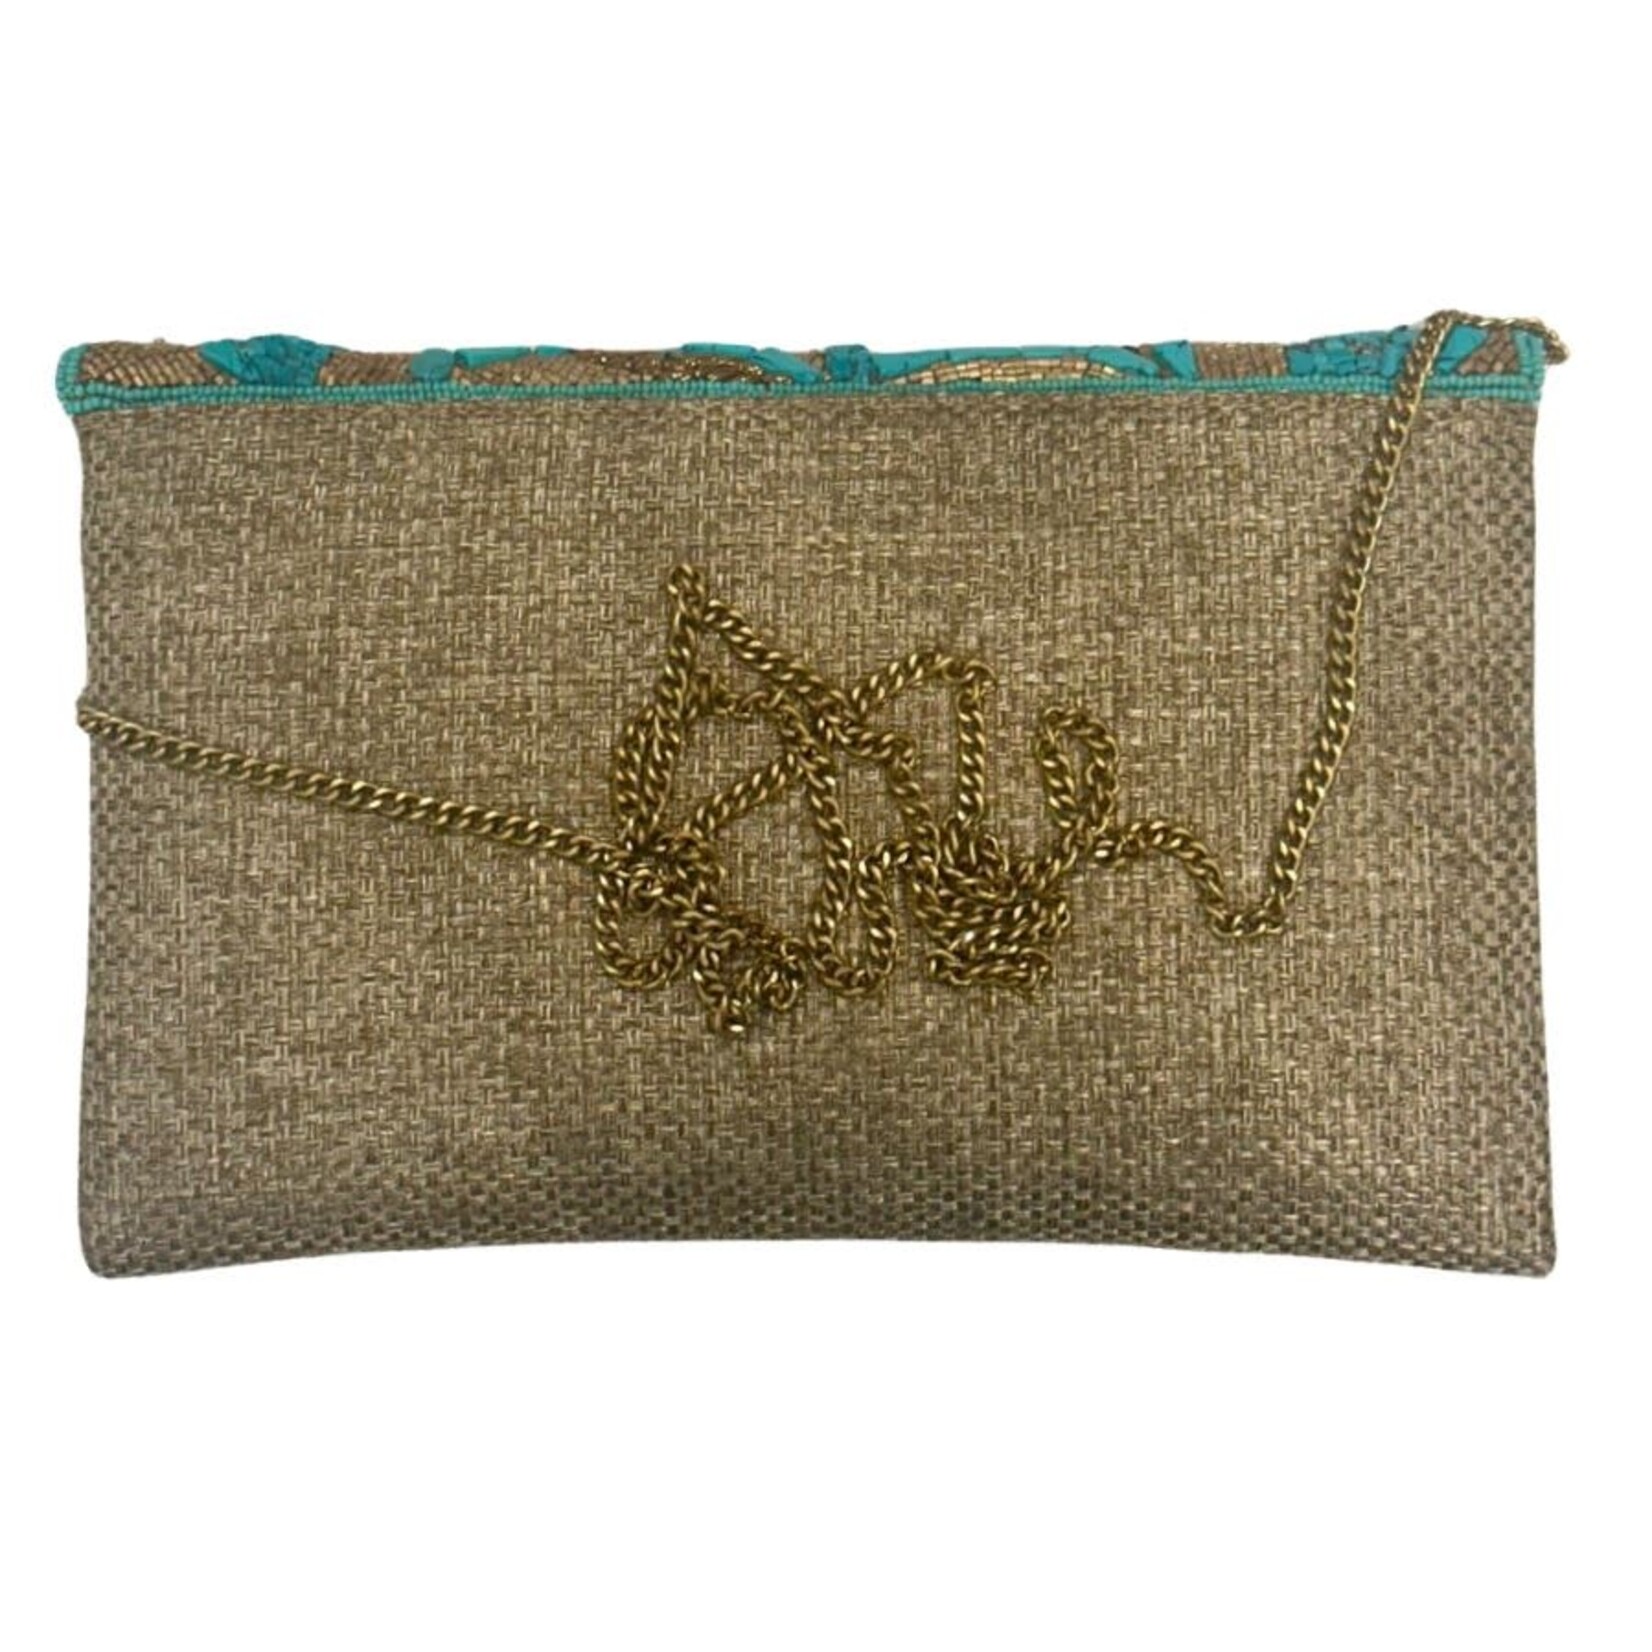 David Jeffery Jute Clutch with Gold Turquois Beads & Chaine